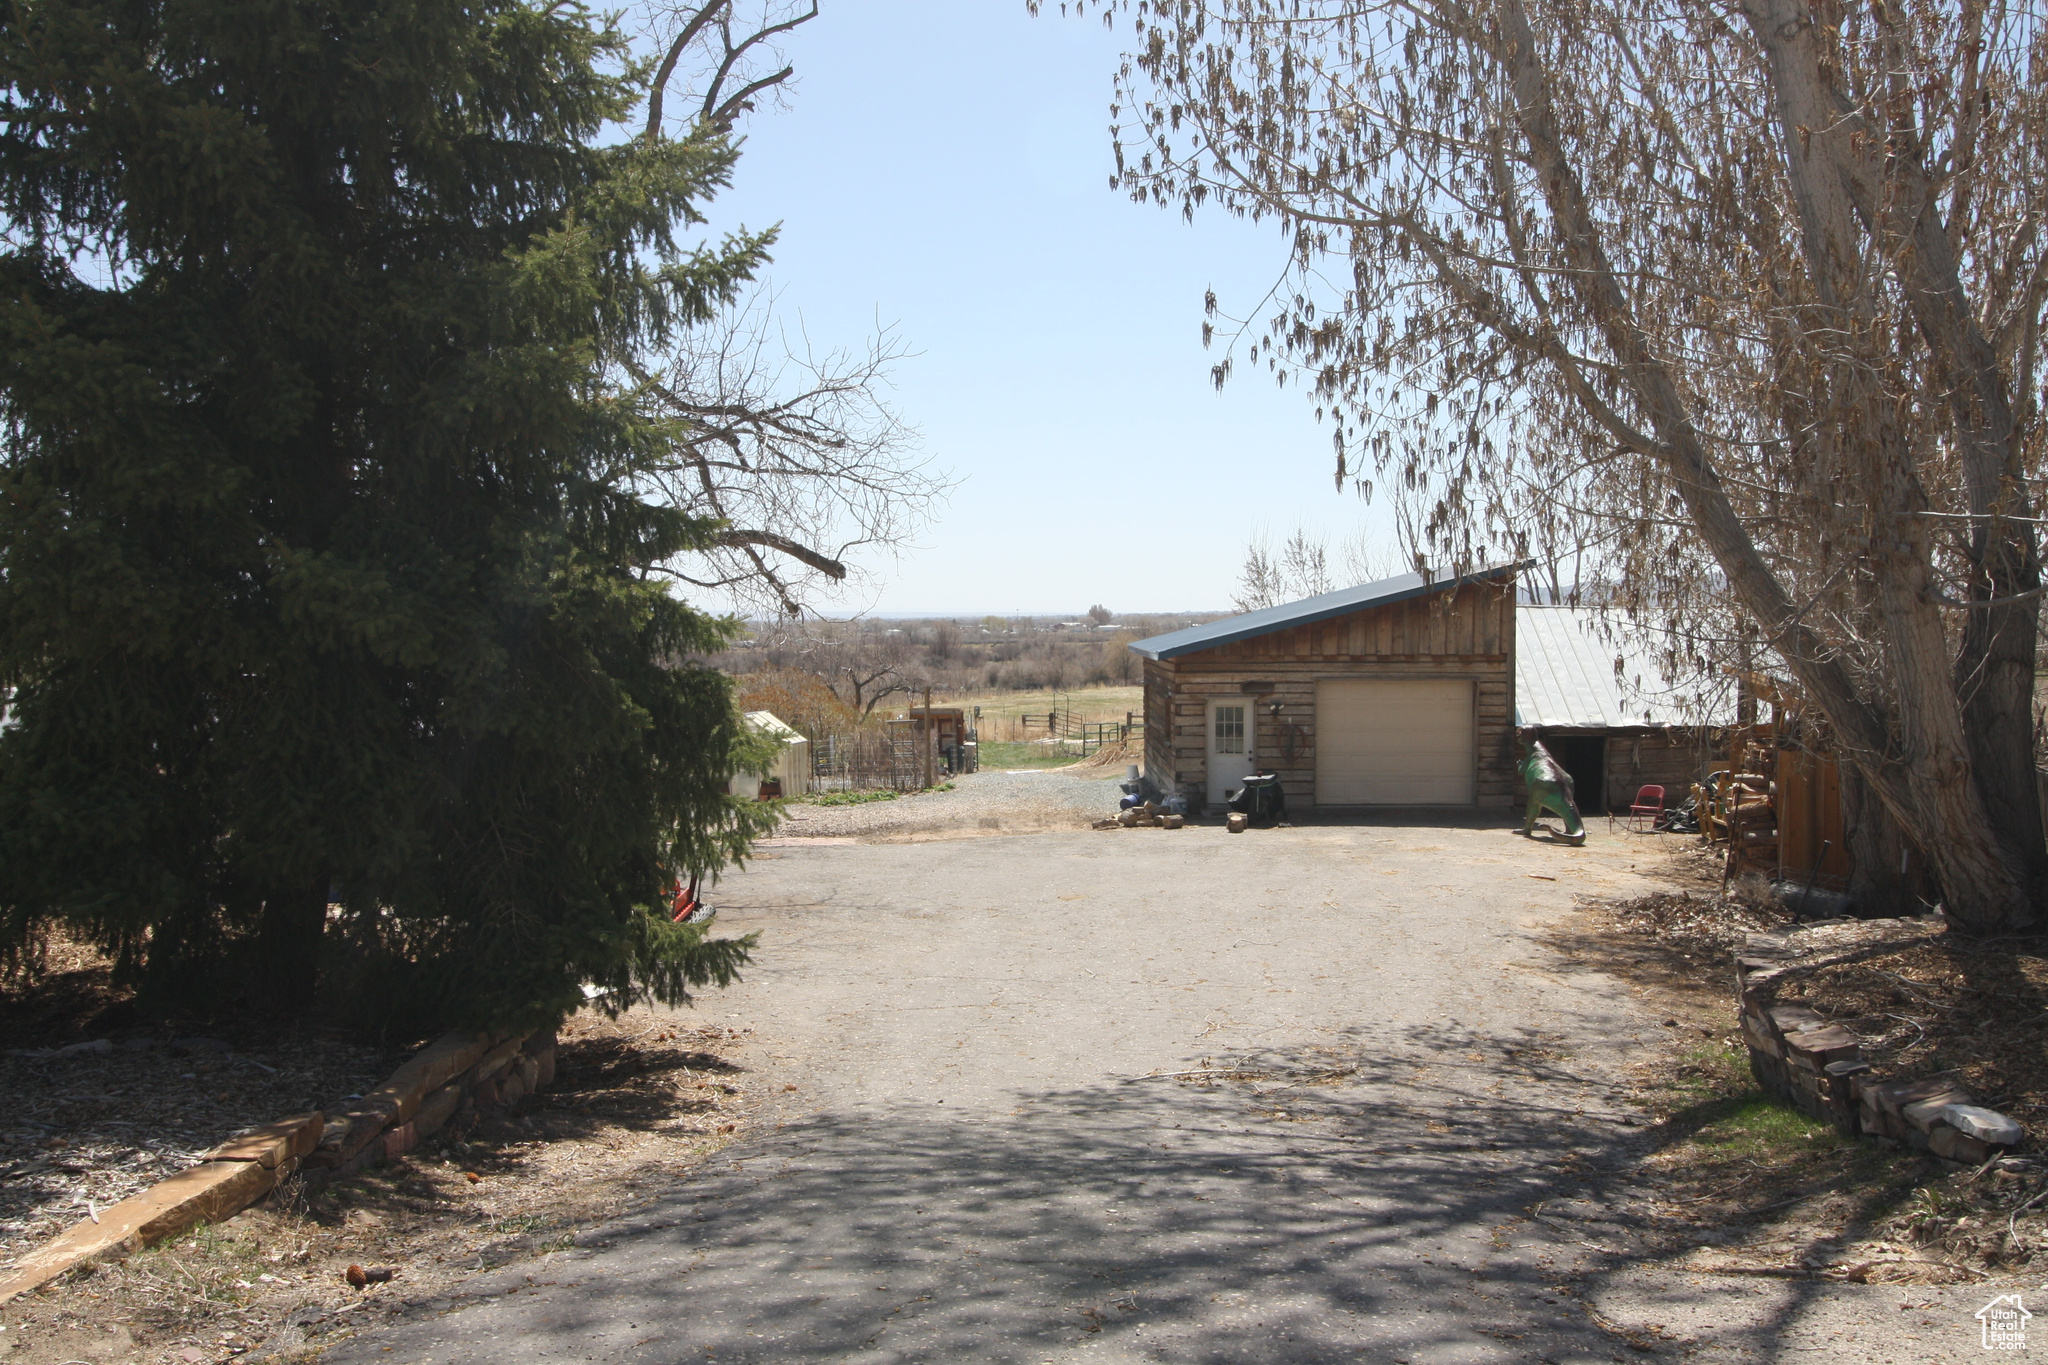 View of yard featuring an outdoor structure and a garage